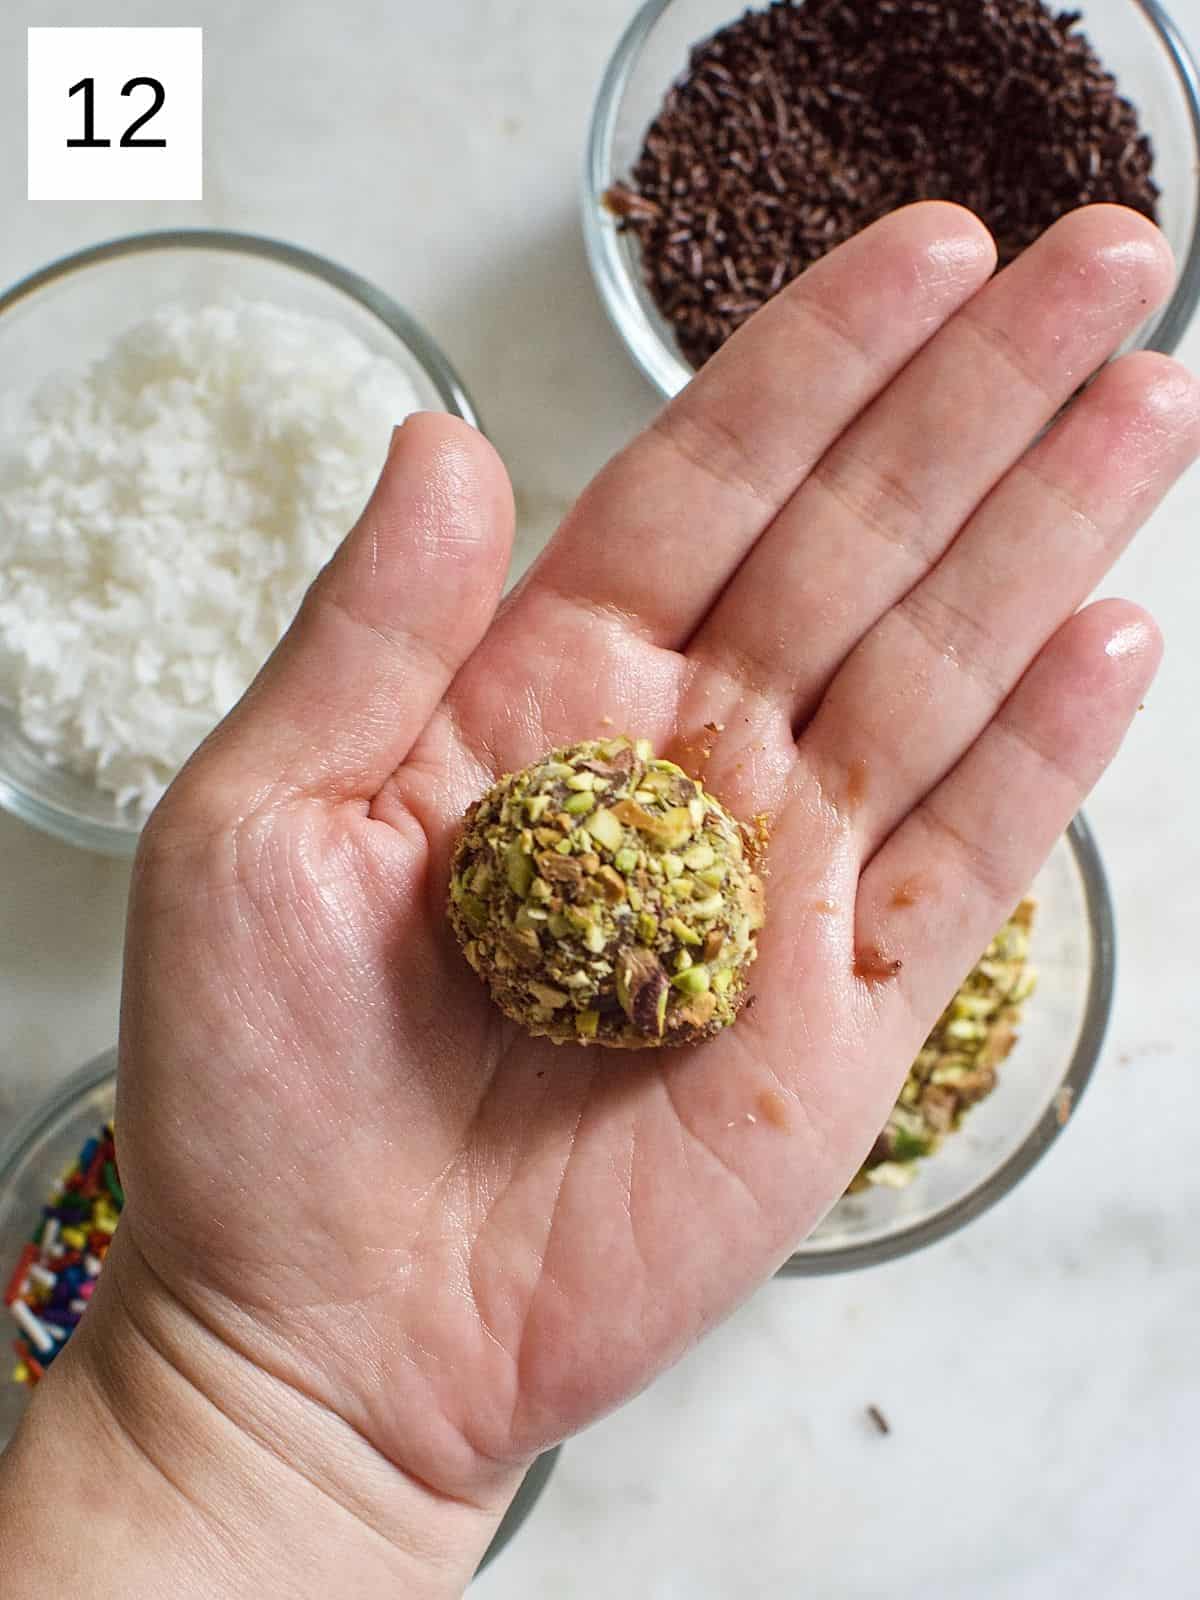 brigadeiro ball coated with chopped nuts.